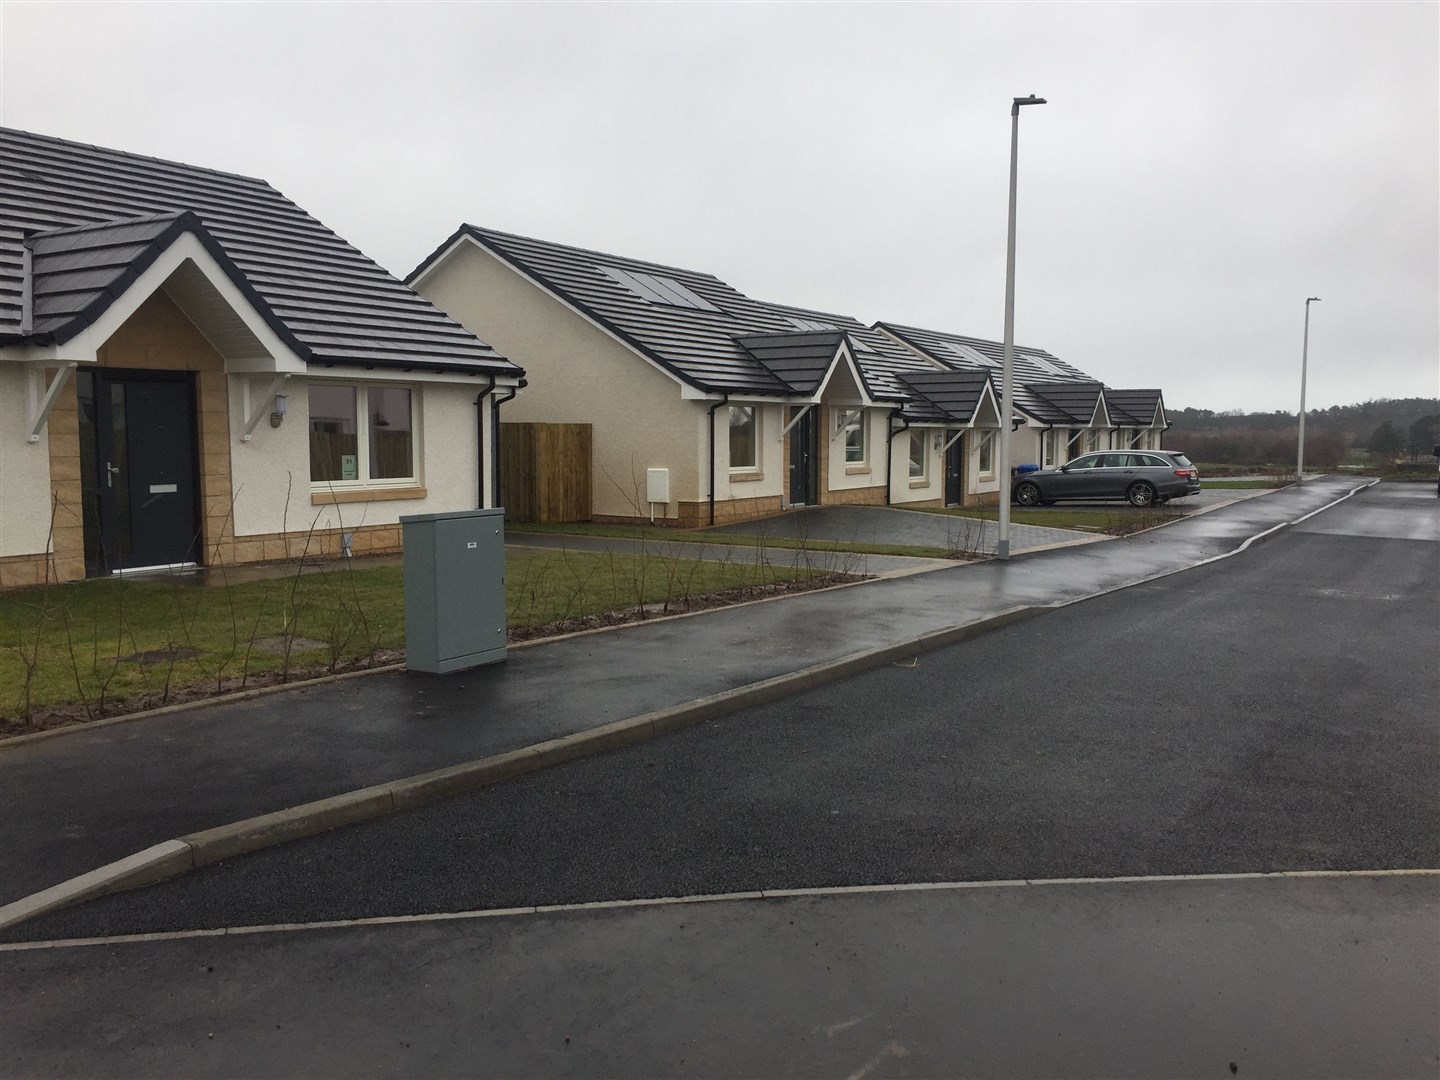 Health and Social Care Moray have secured the tenancy rights for seven bungalows in Elgin.